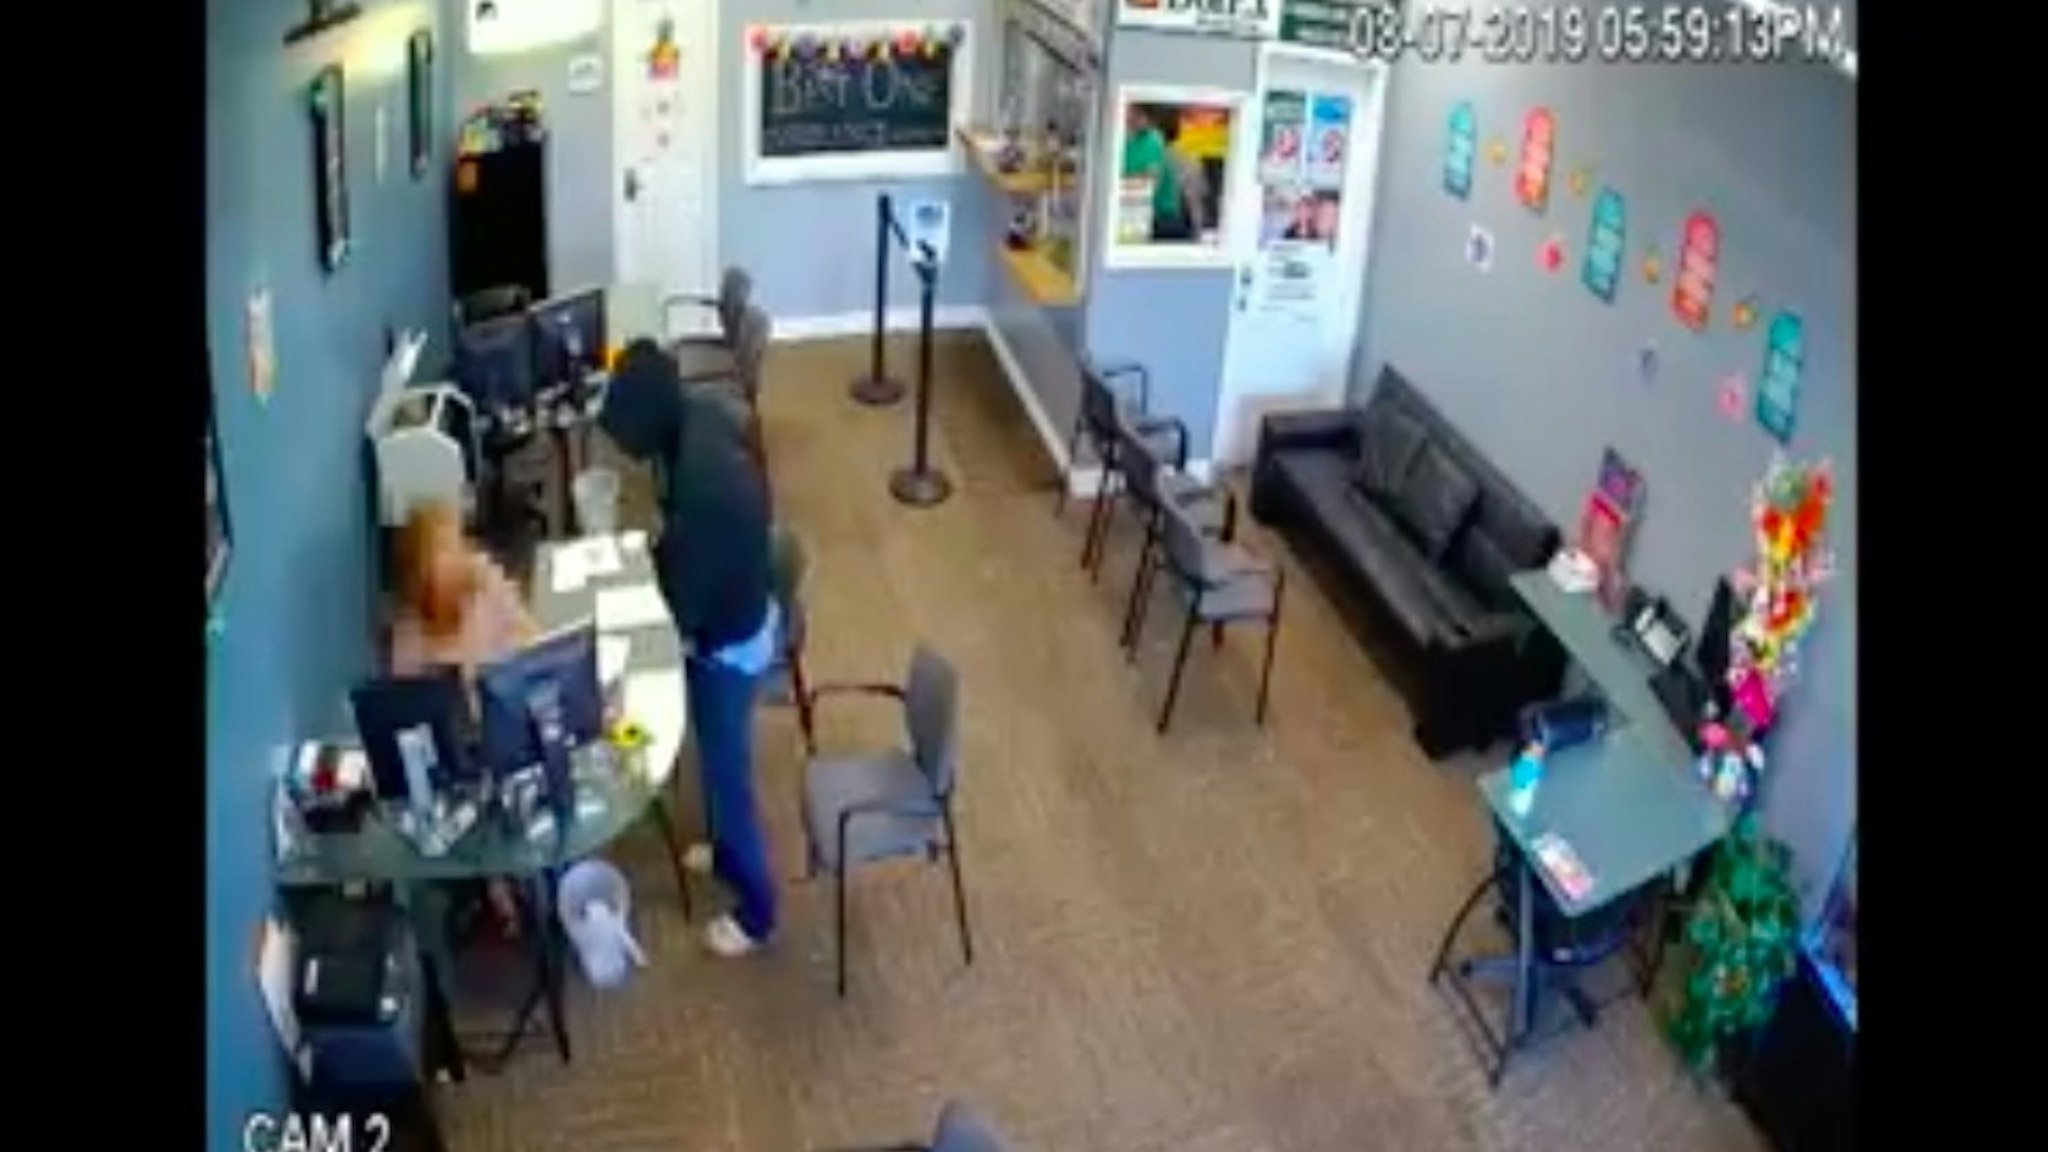 The moment a knife-wielding man attacks an employee of an insurance company.